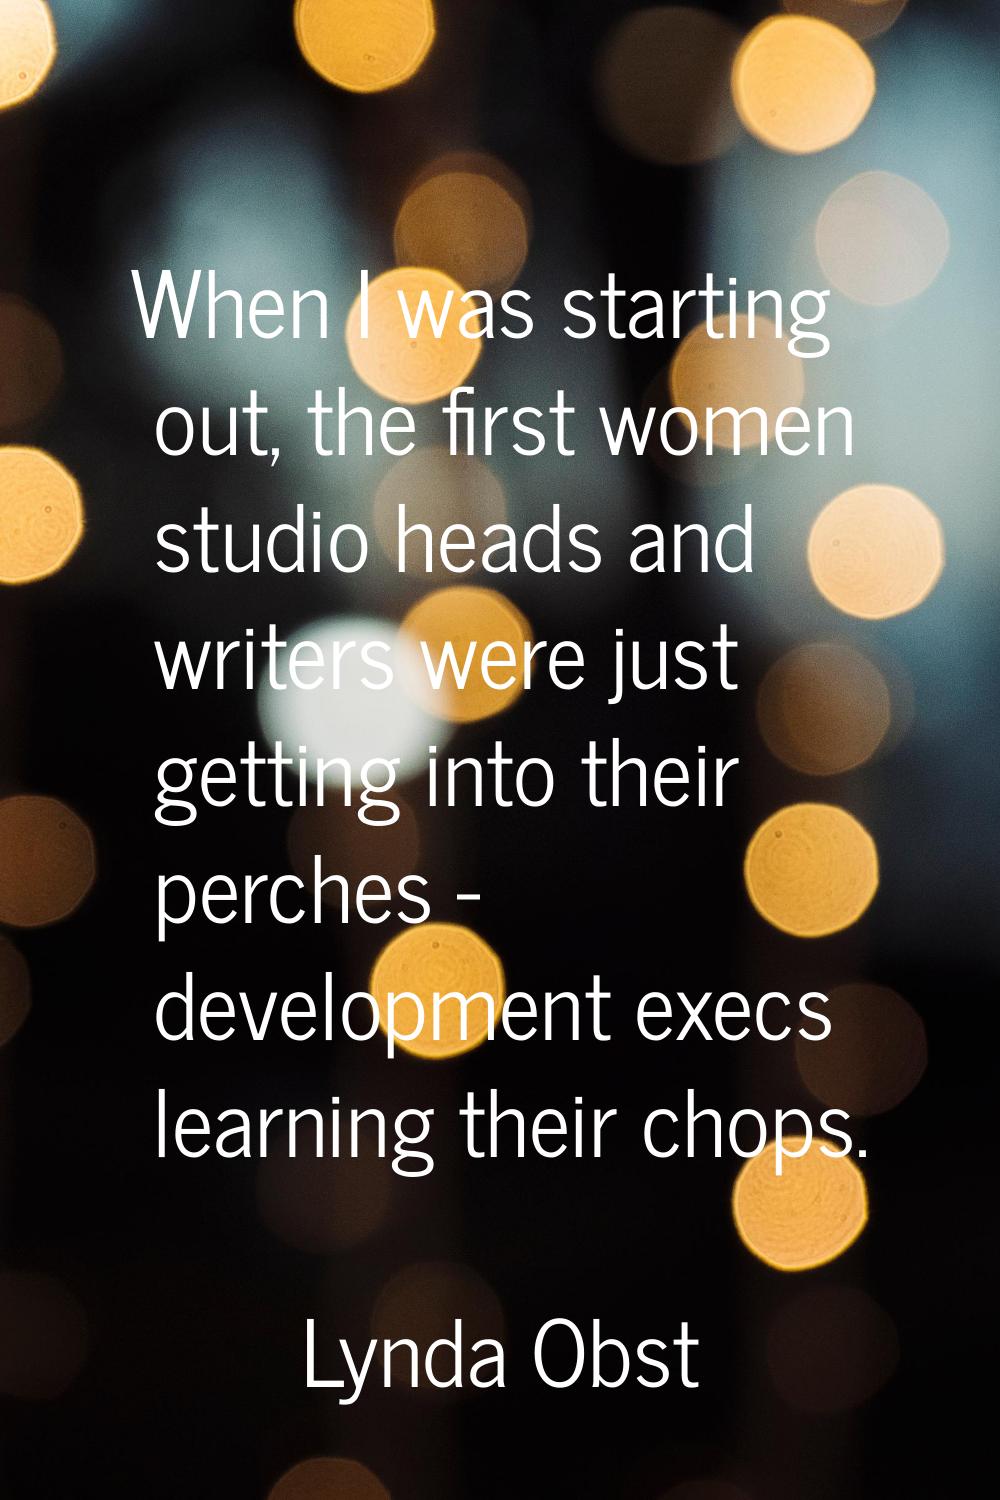 When I was starting out, the first women studio heads and writers were just getting into their perc